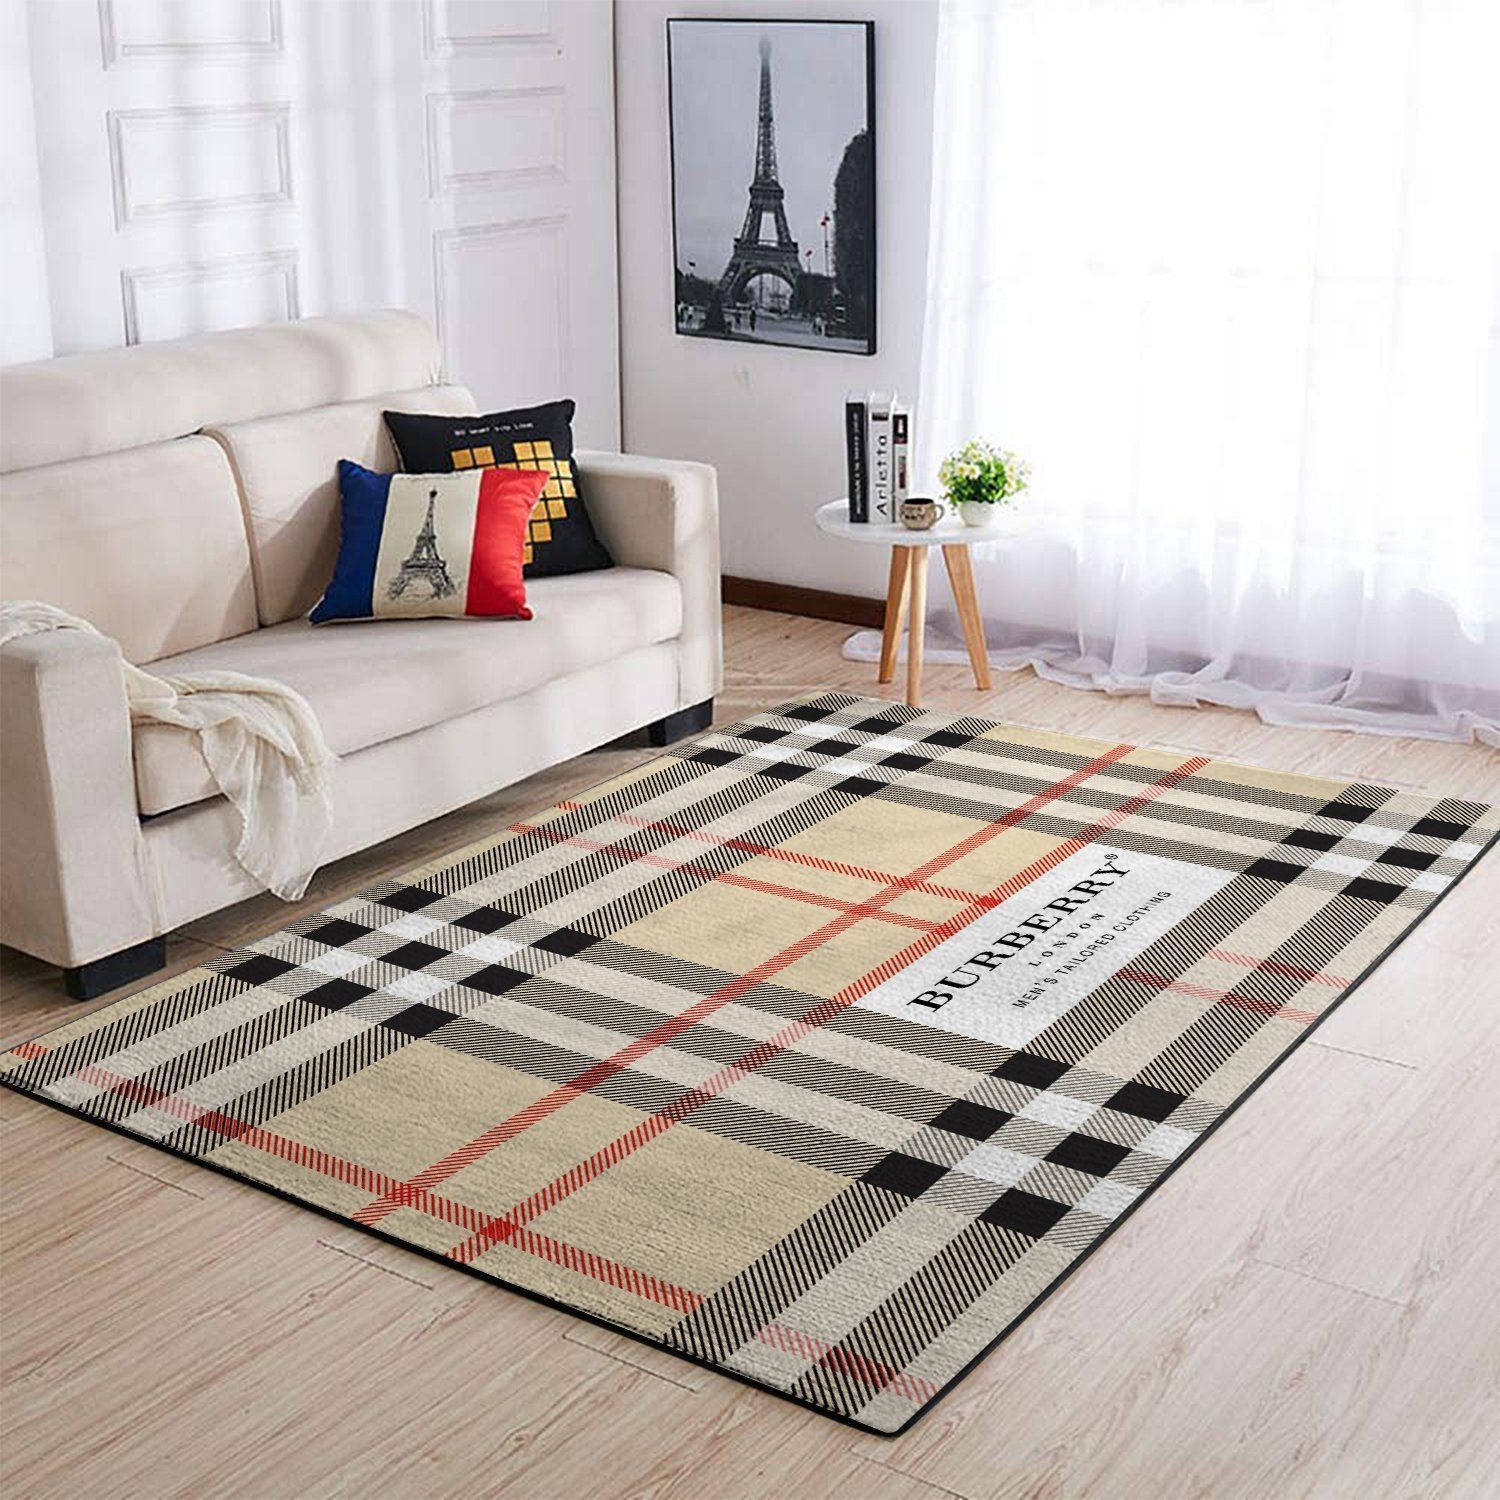 Burberry Luxury Brand 23 Area Rug Living Room And Bedroom Rug Us Gift Decor VH3